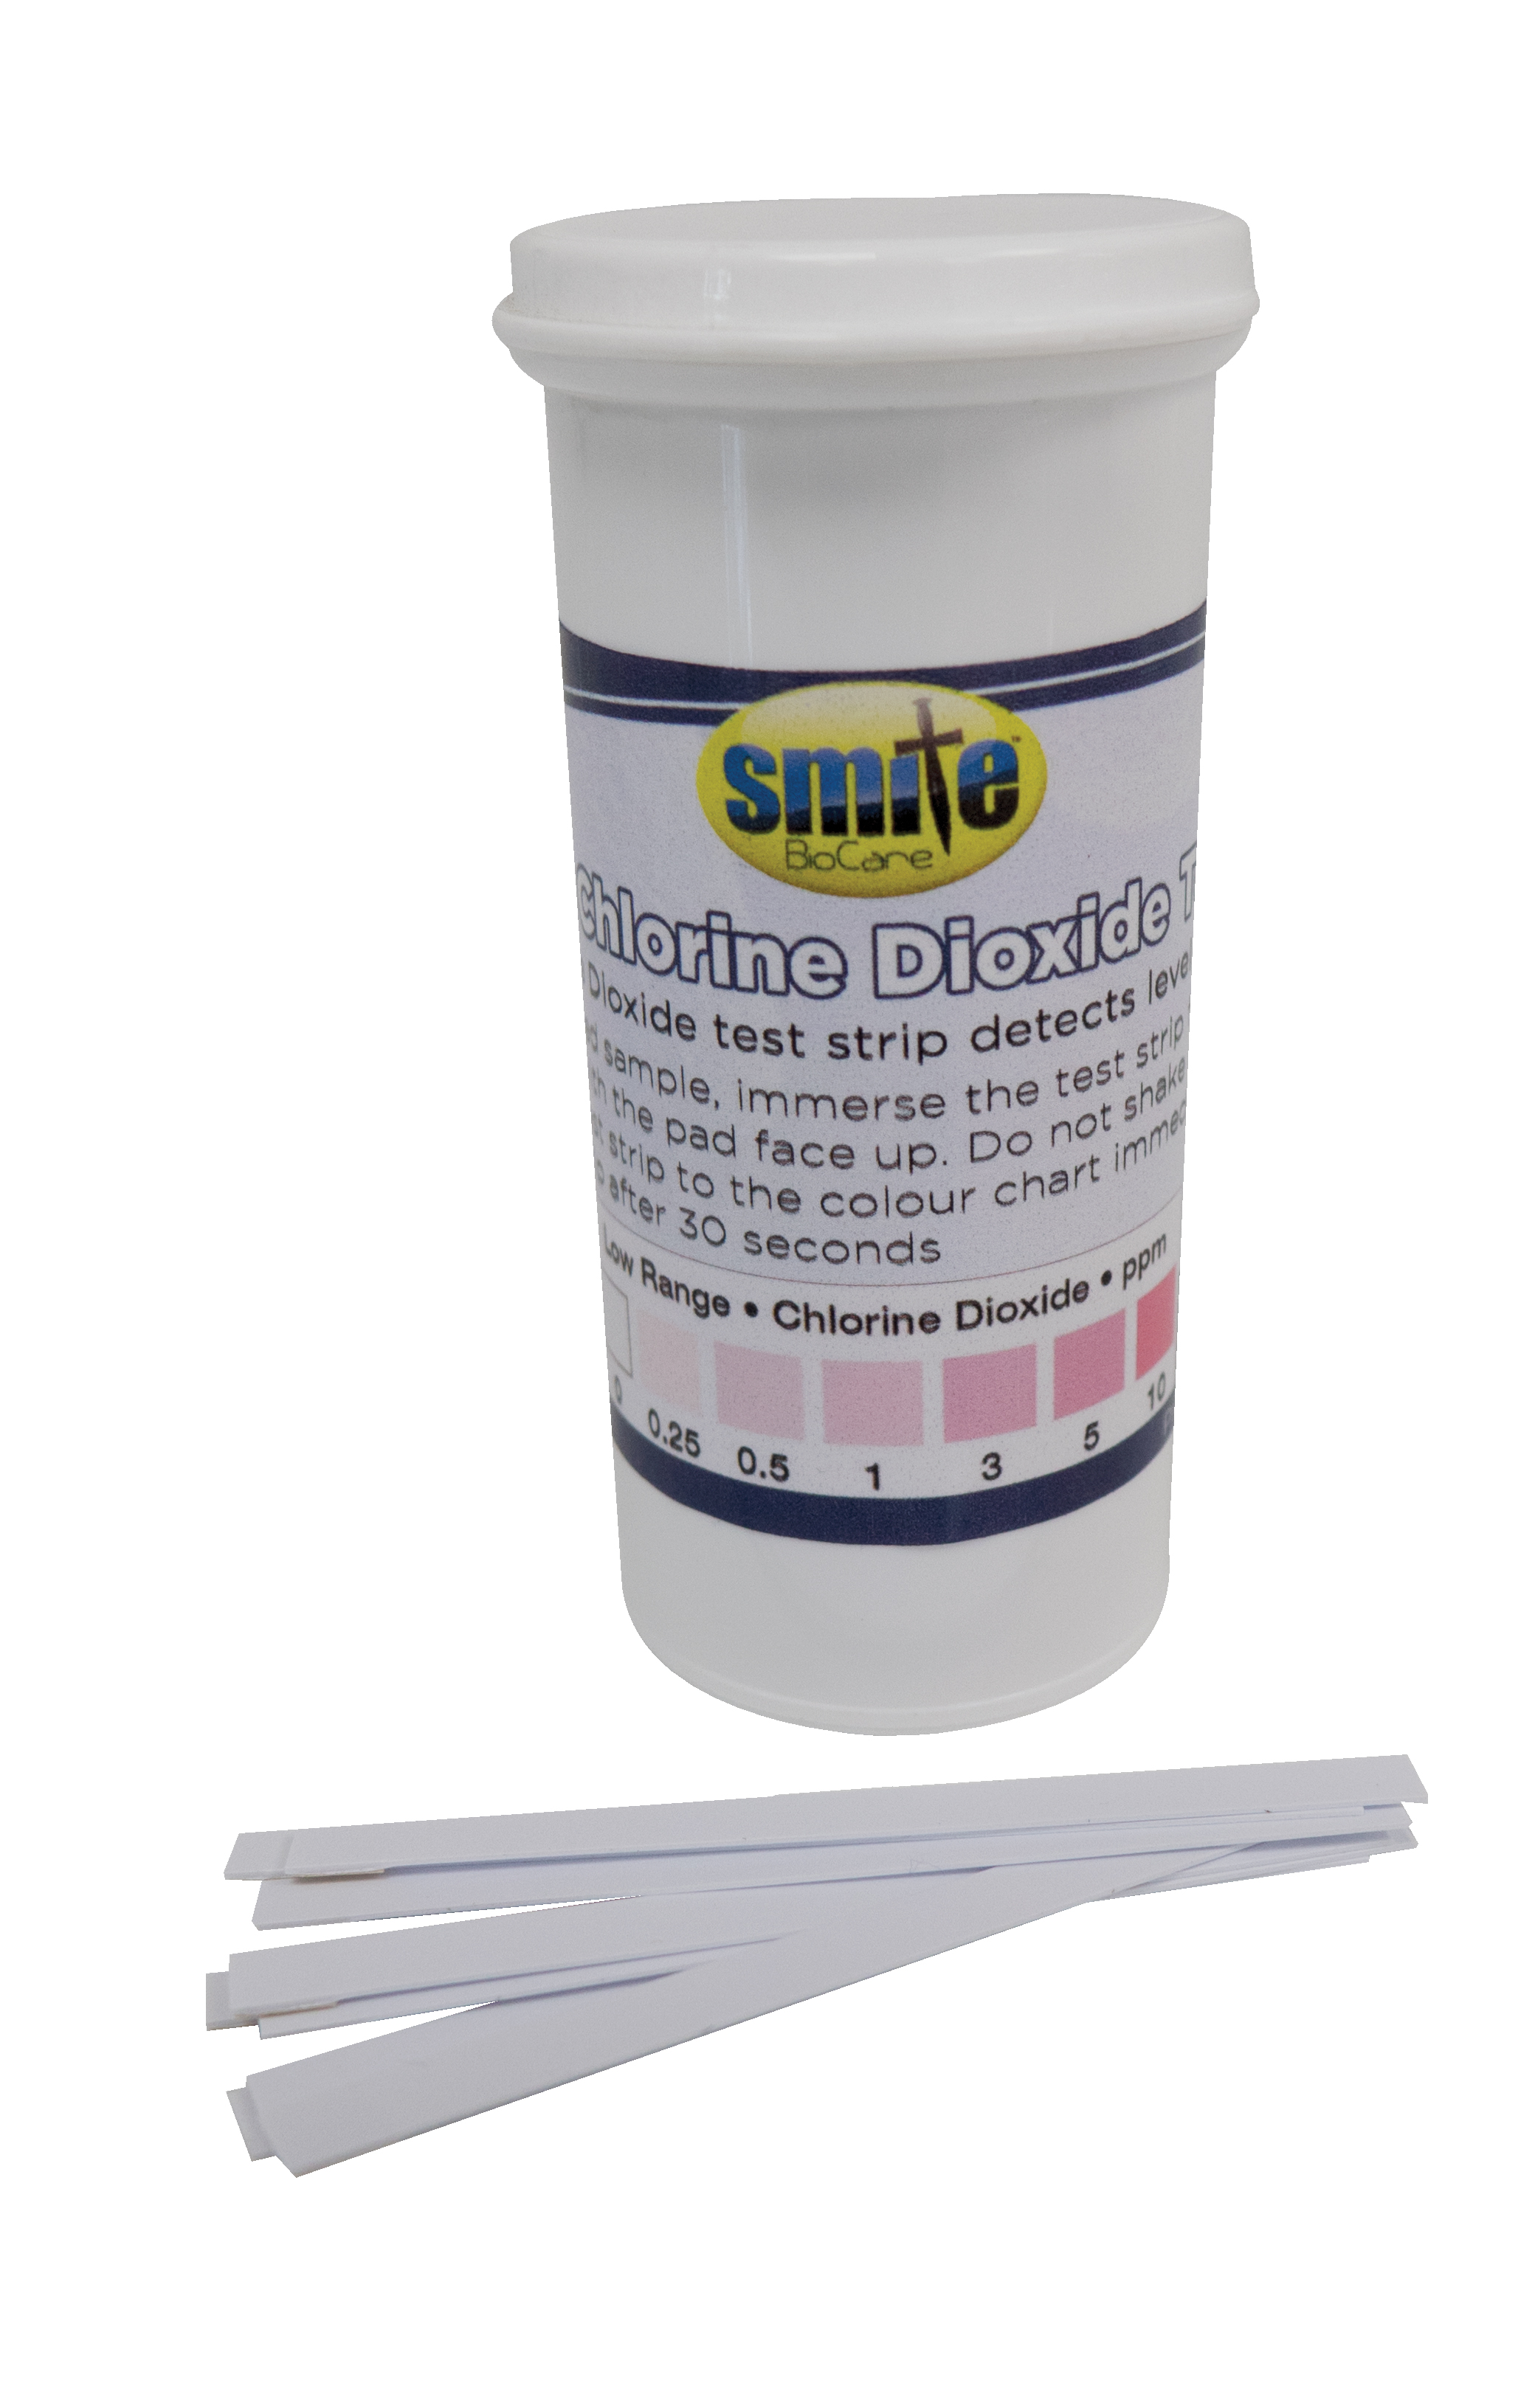 Smite Biocare, Residual Chlorine Dioxide Test Strip, 10ppm - Supplied in a vial 50